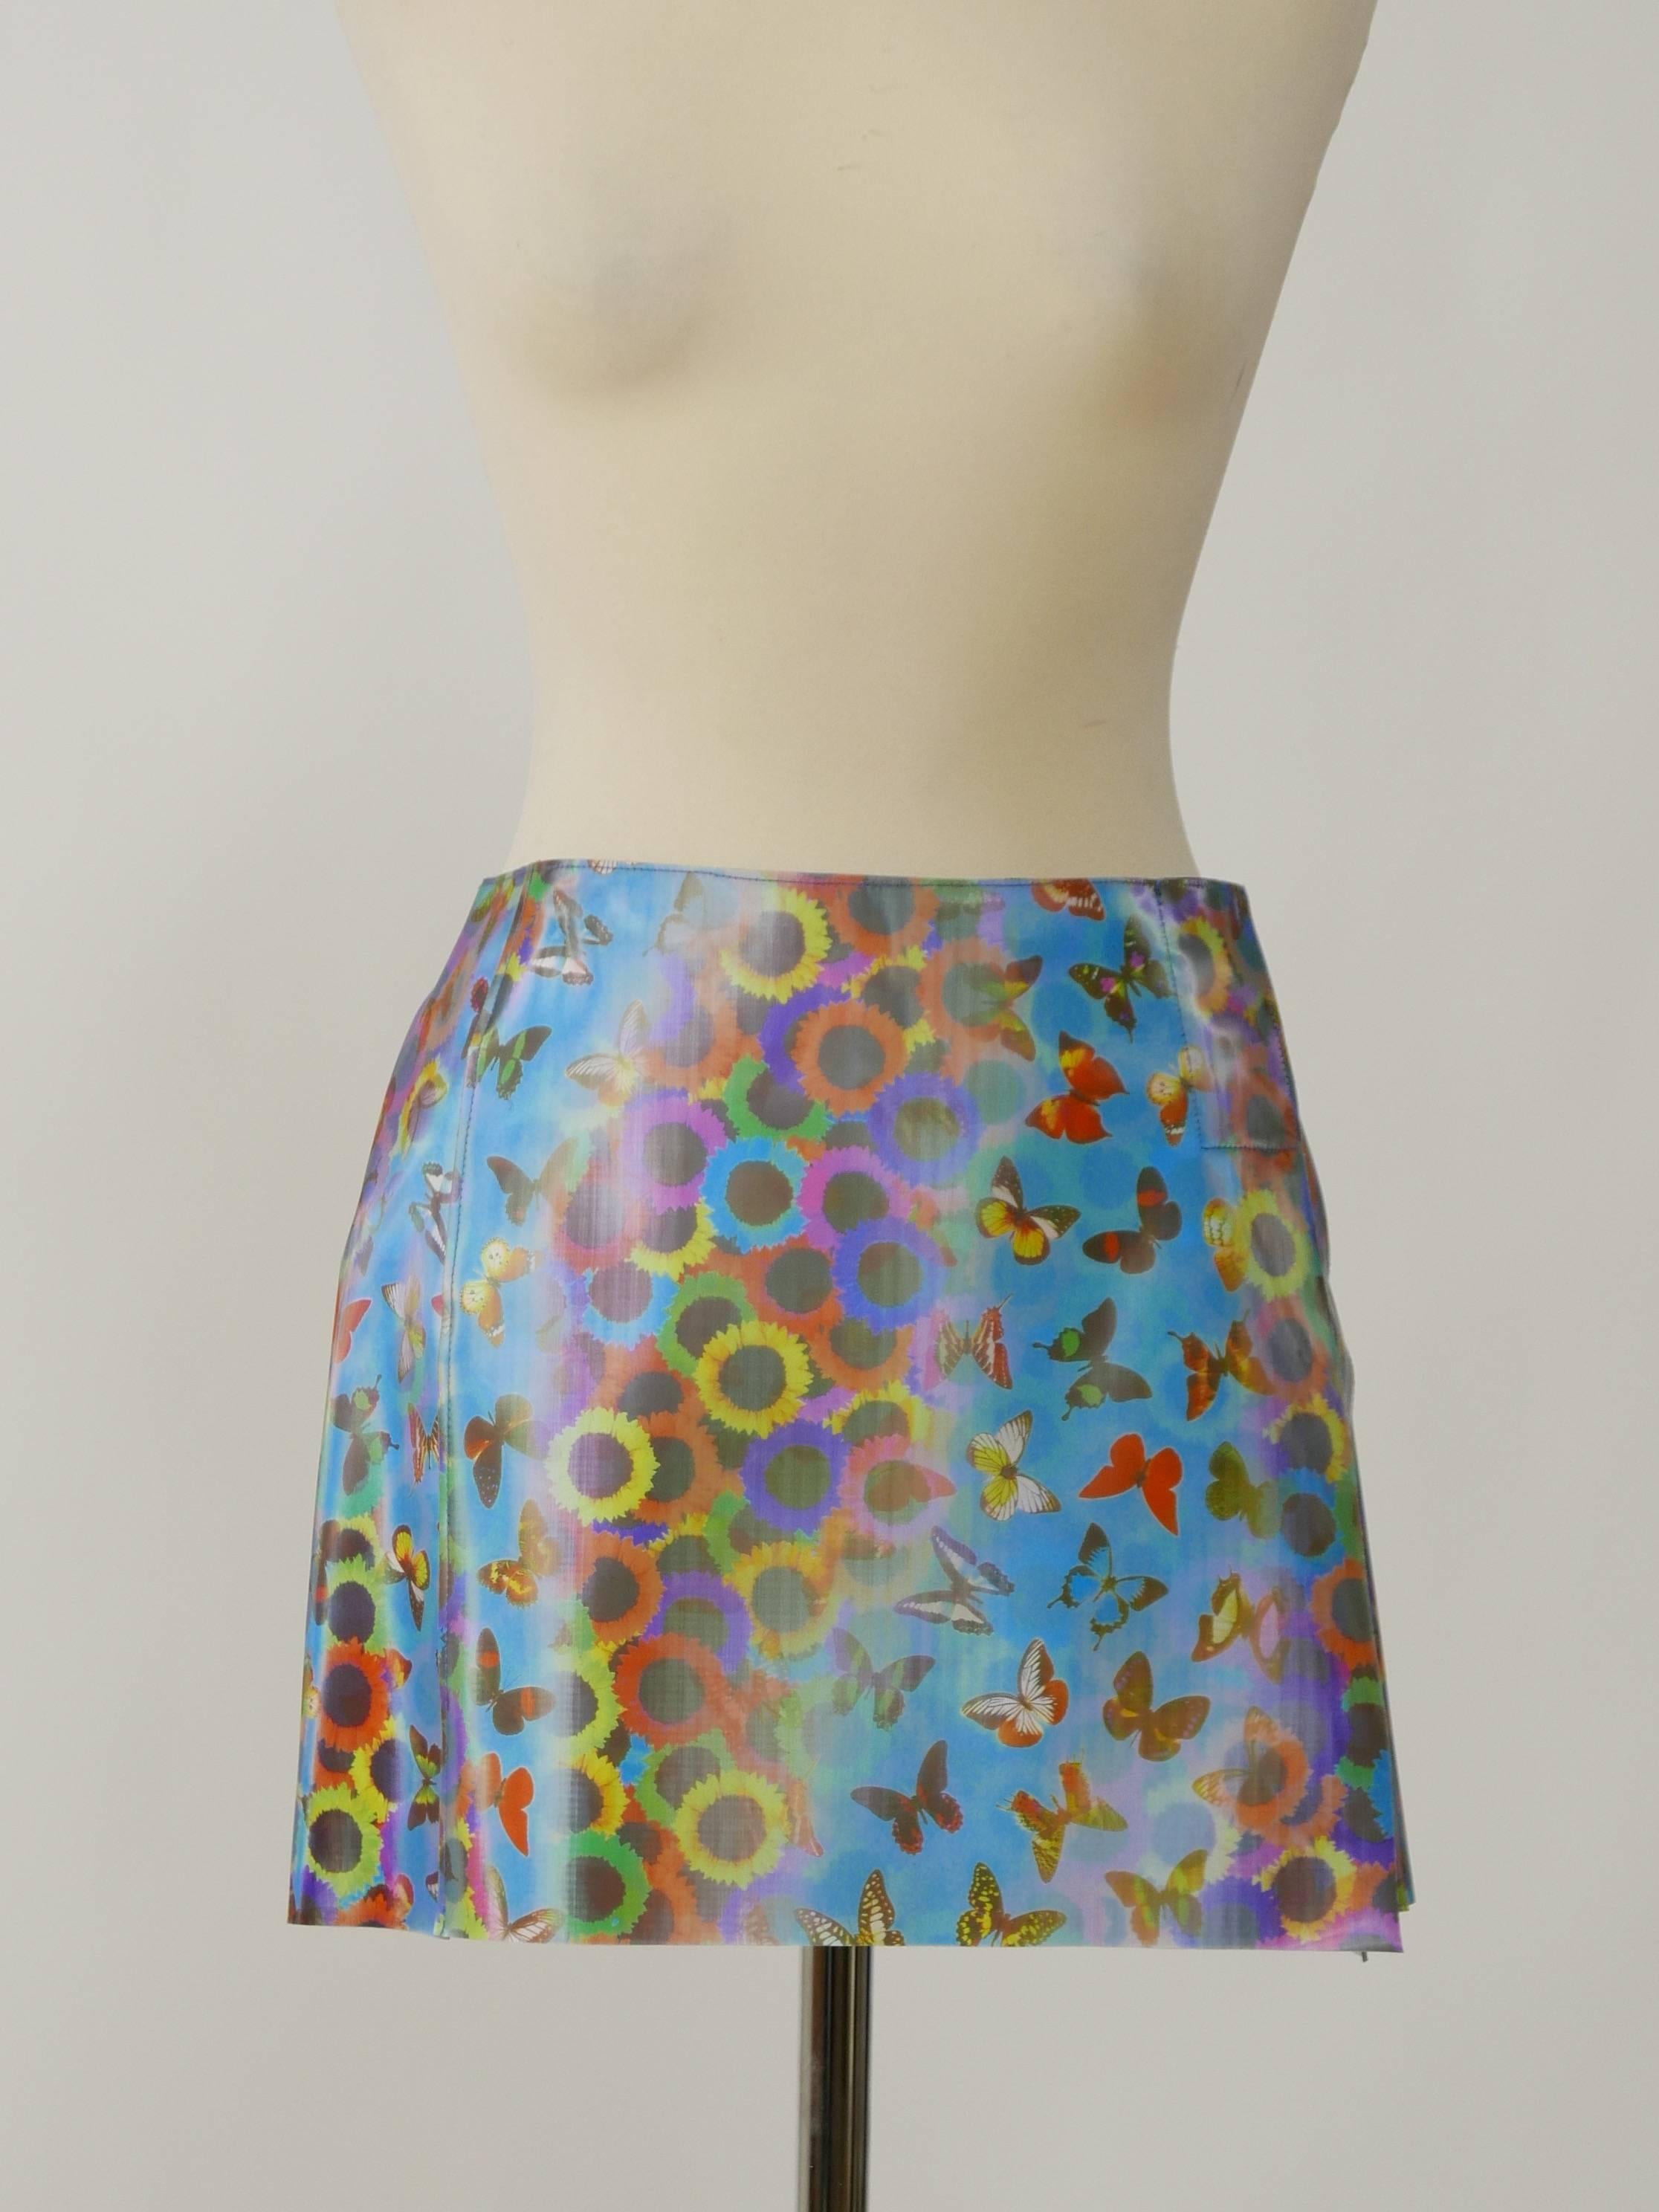 This amazing Dolce & Gabbana mini skirt is in a butterfly and sunflowers holographic print PVC . It has side velcro closure. 

New condition w/tag

Label: Dolce & Gabbana - Made in Italy
Fabric: PVC
Color: